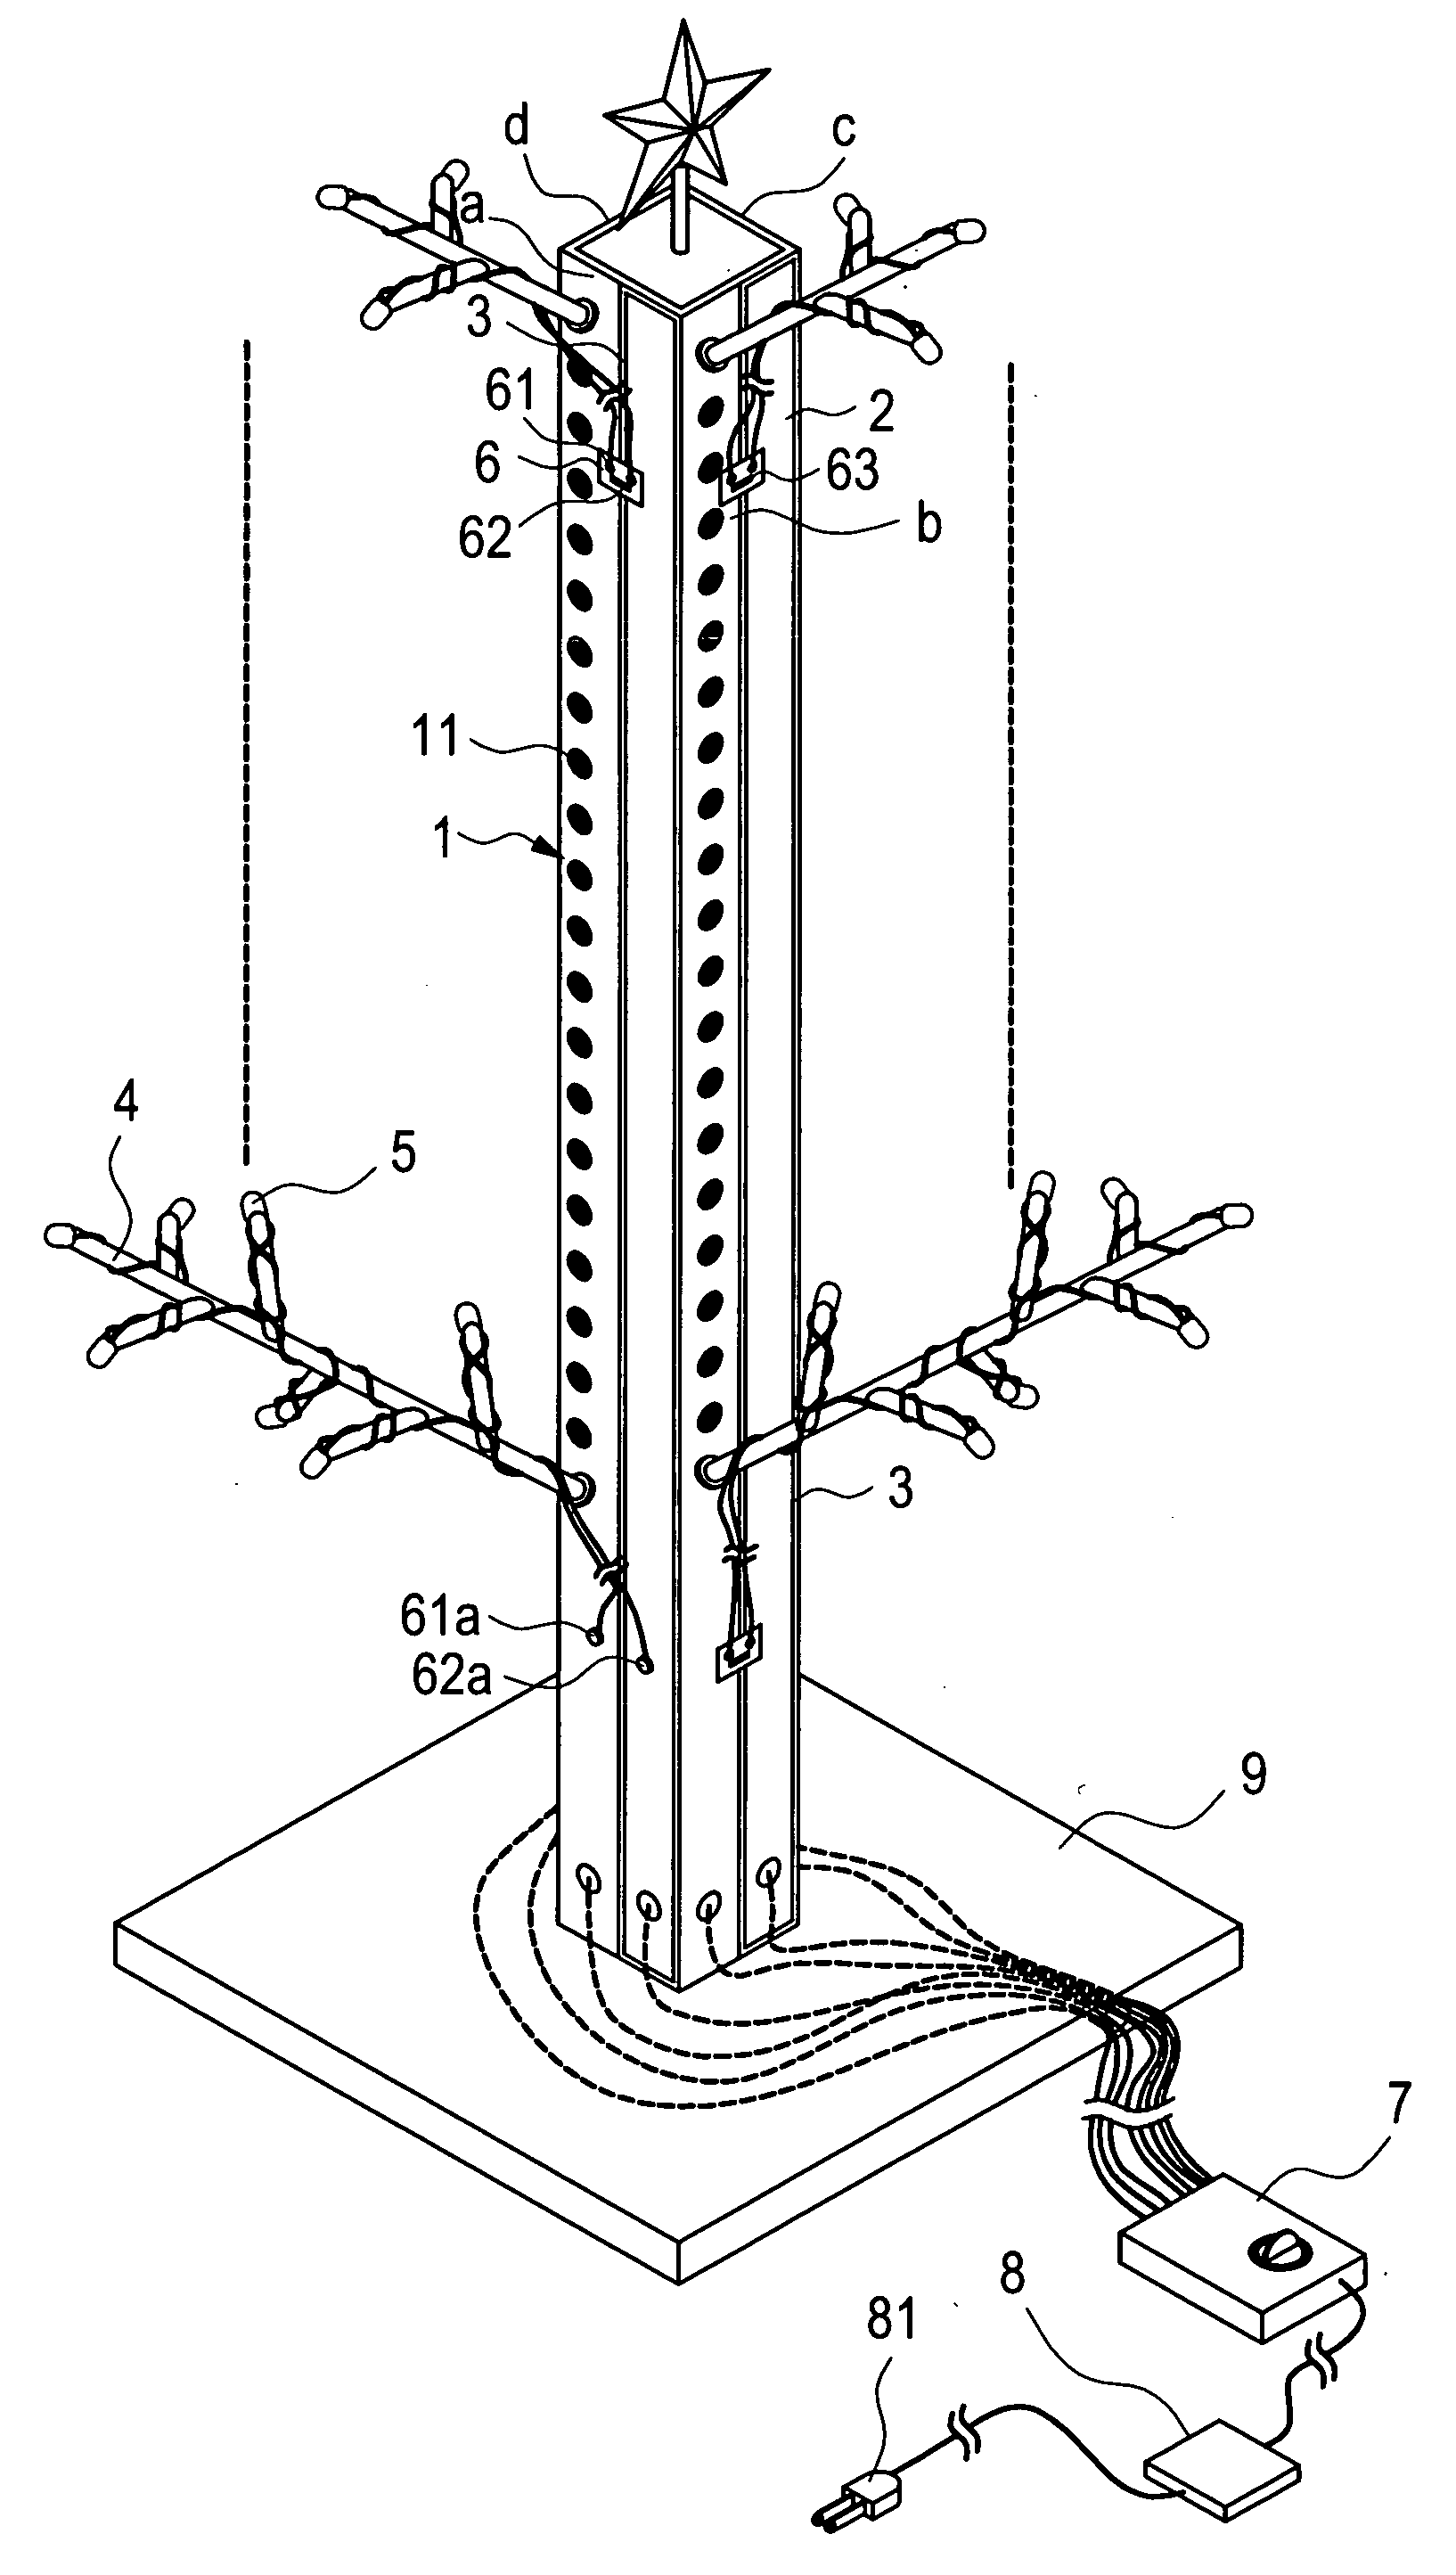 Lighting and flashing christmas tree structure apparatus